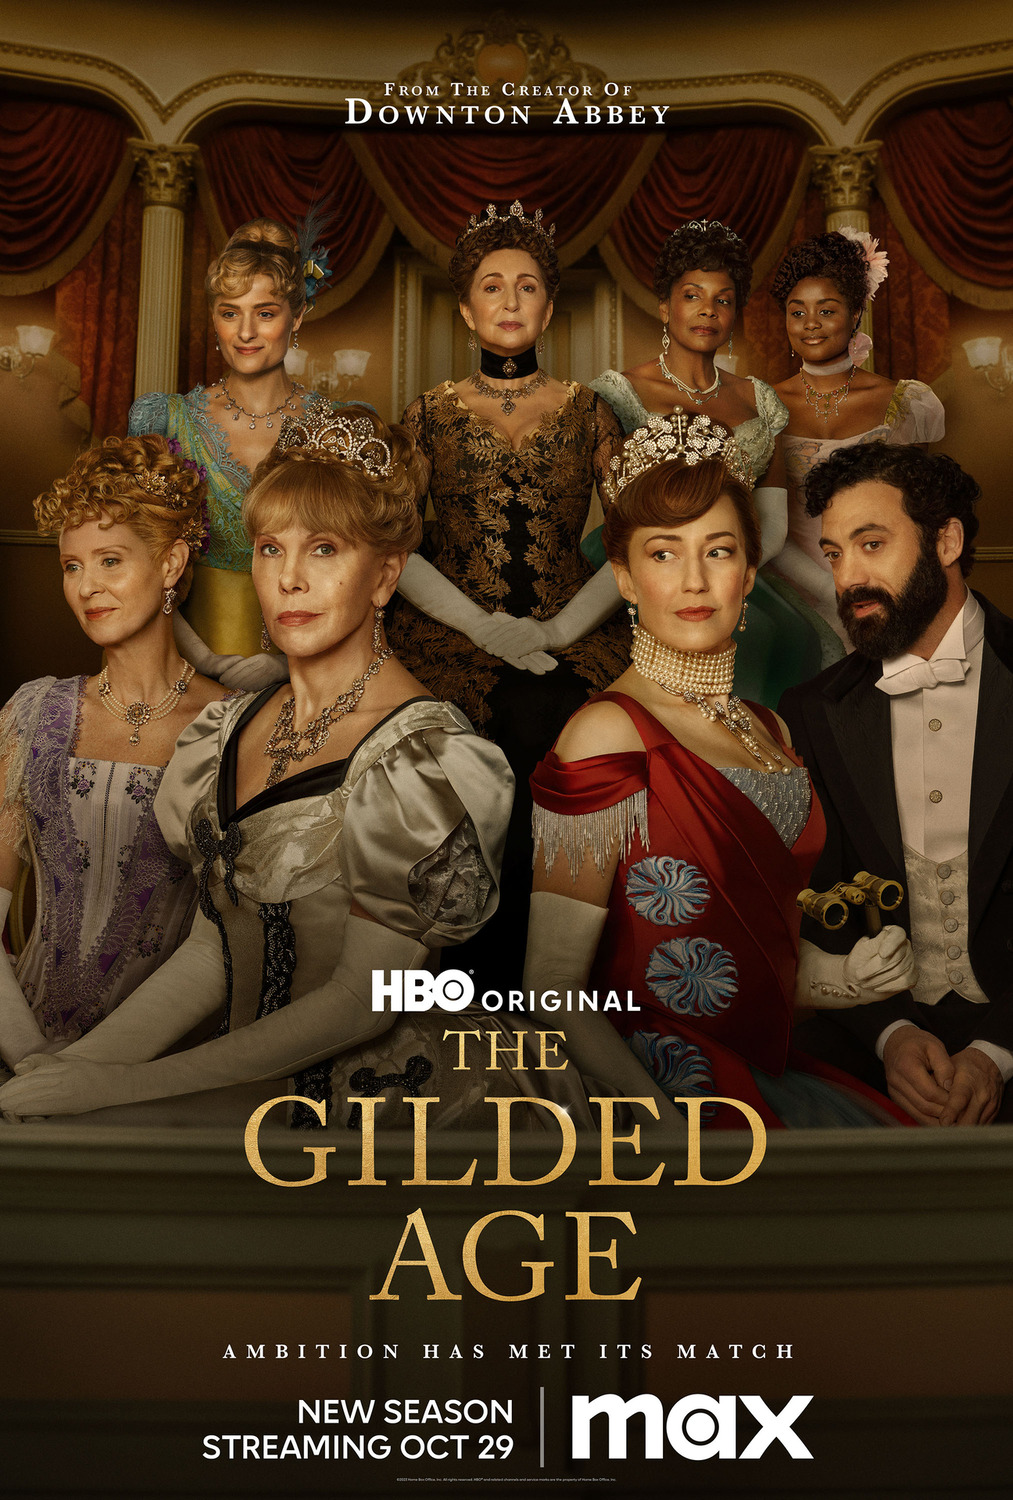 The Gilded Age S02 E08 In Terms of Winning and Losing (1080p-Nlsubs) FINAL